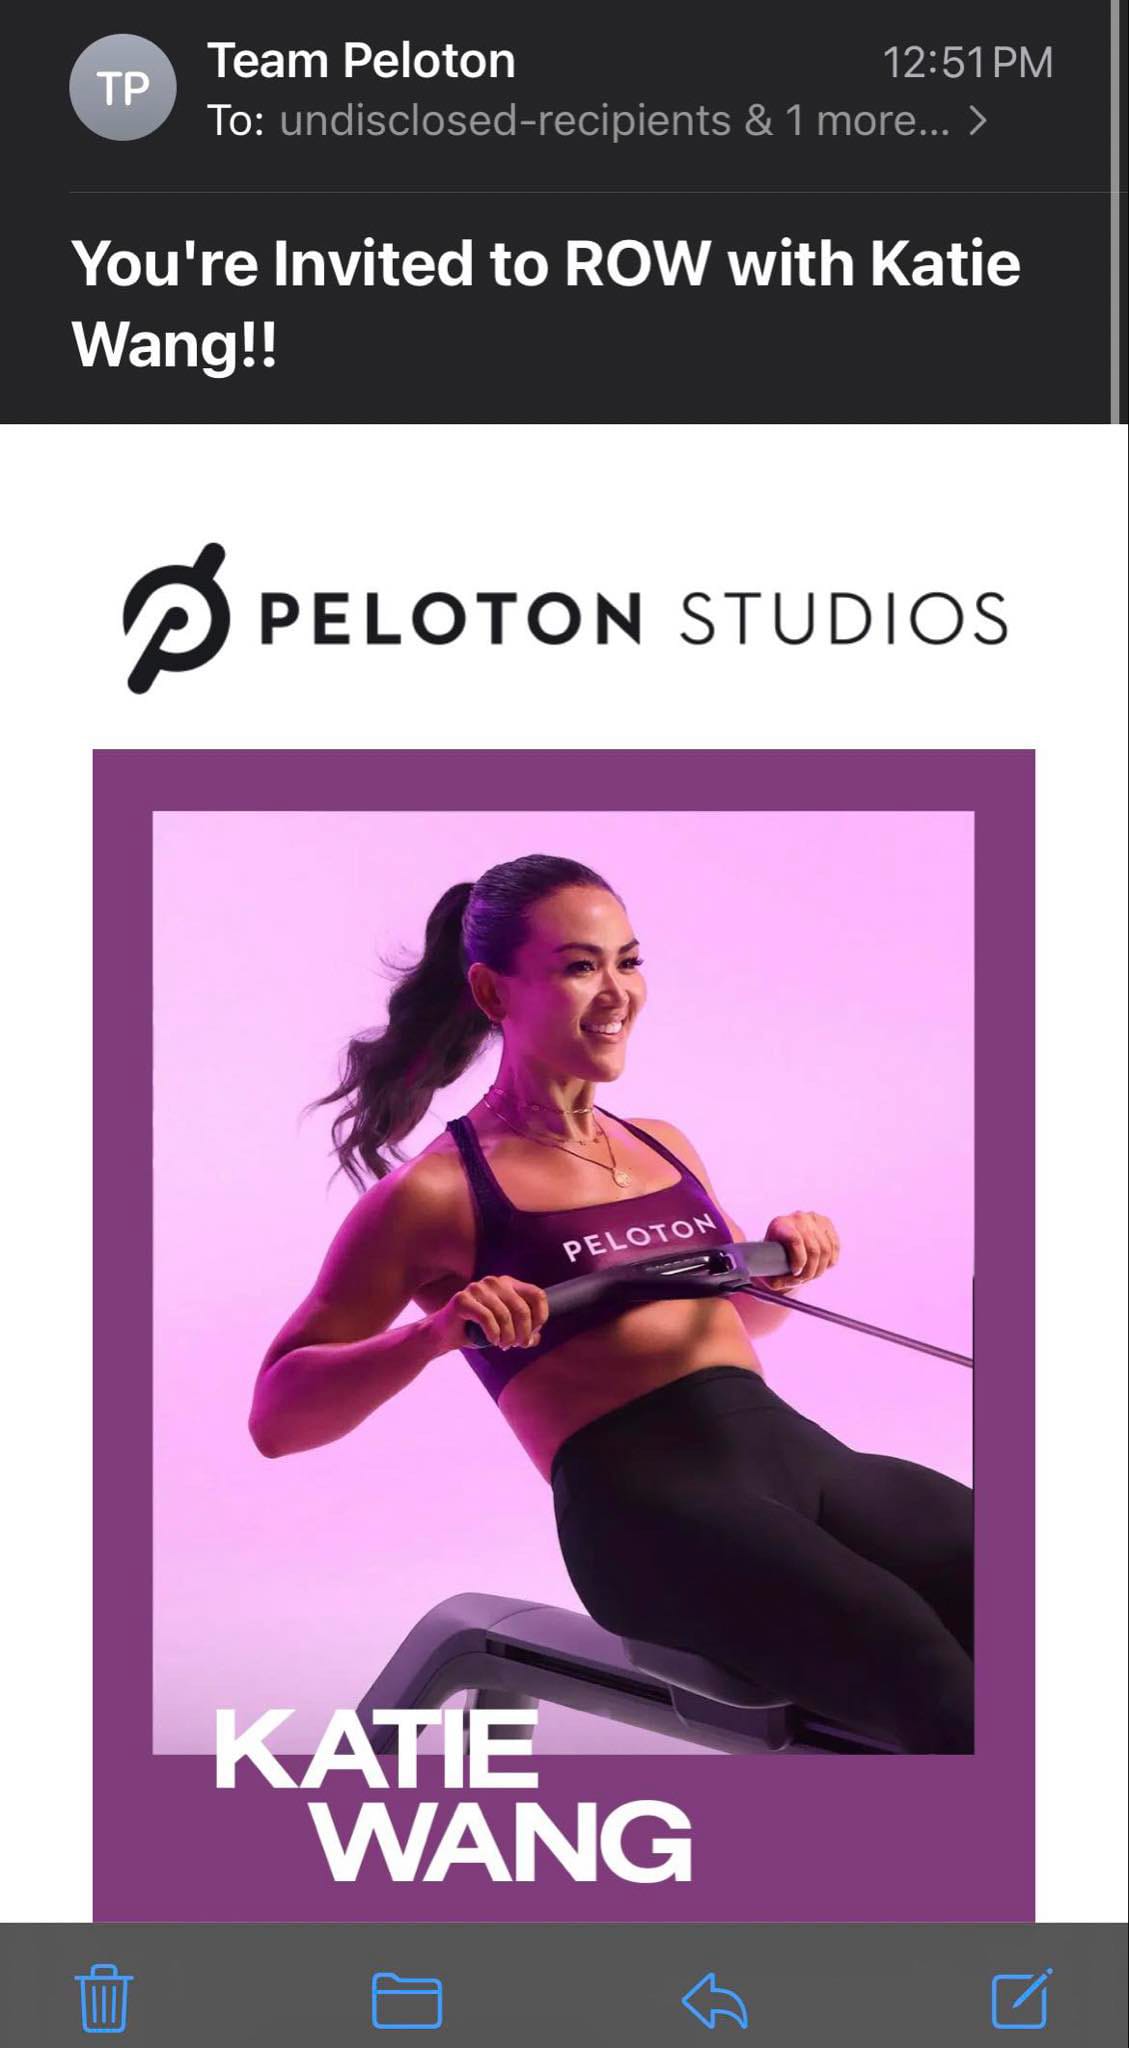 Peloton email inviting members to book a spot in a live rowing class at PSNY.